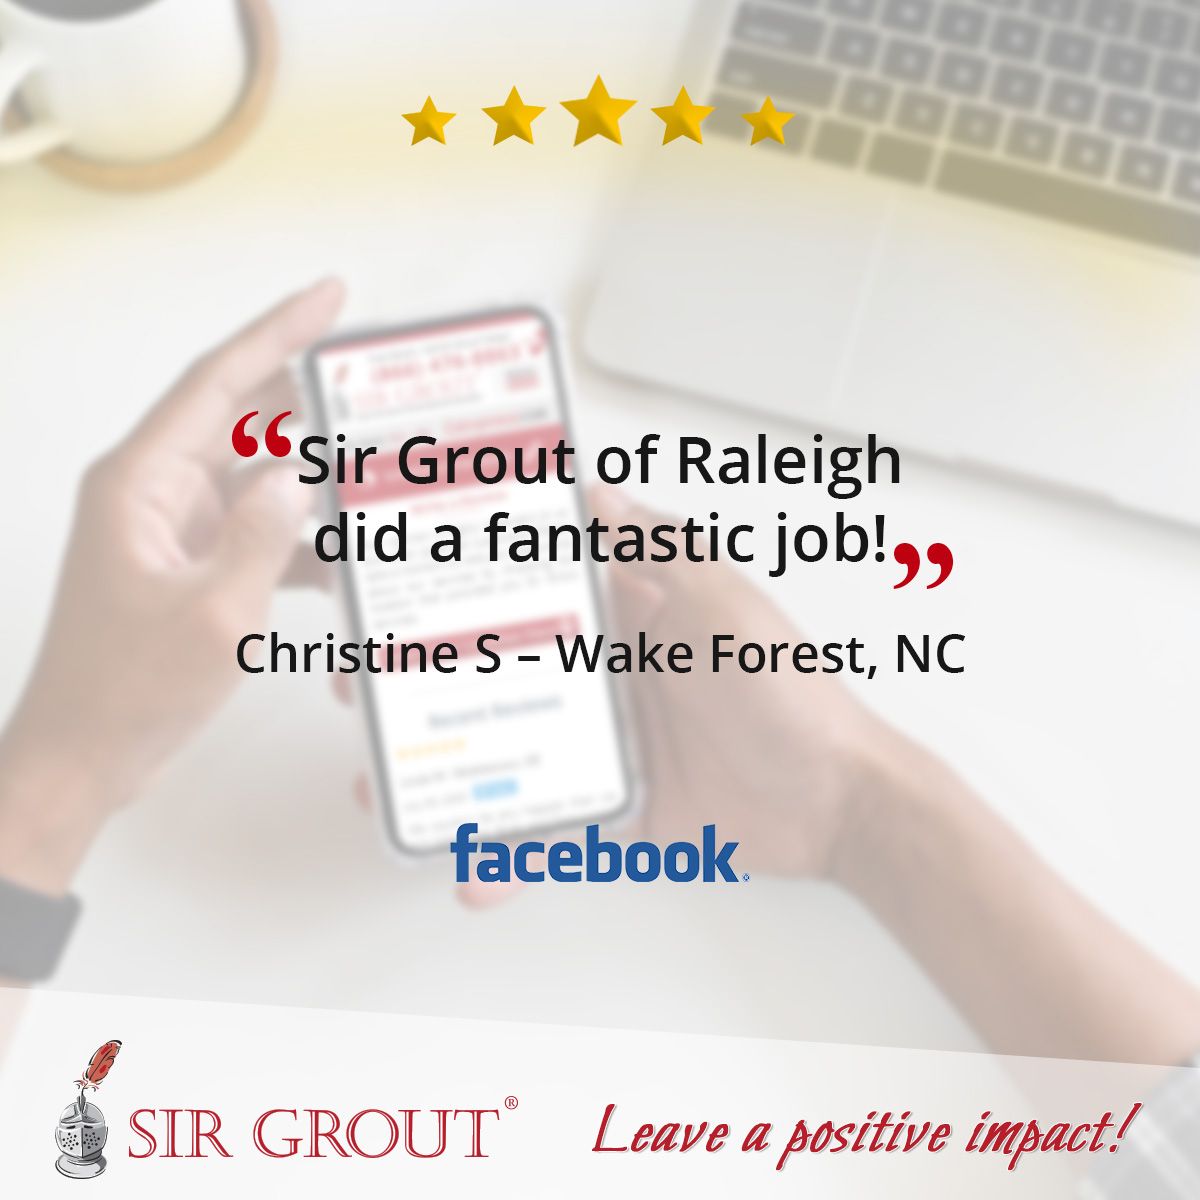 Sir Grout of Raleigh did a fantastic job!